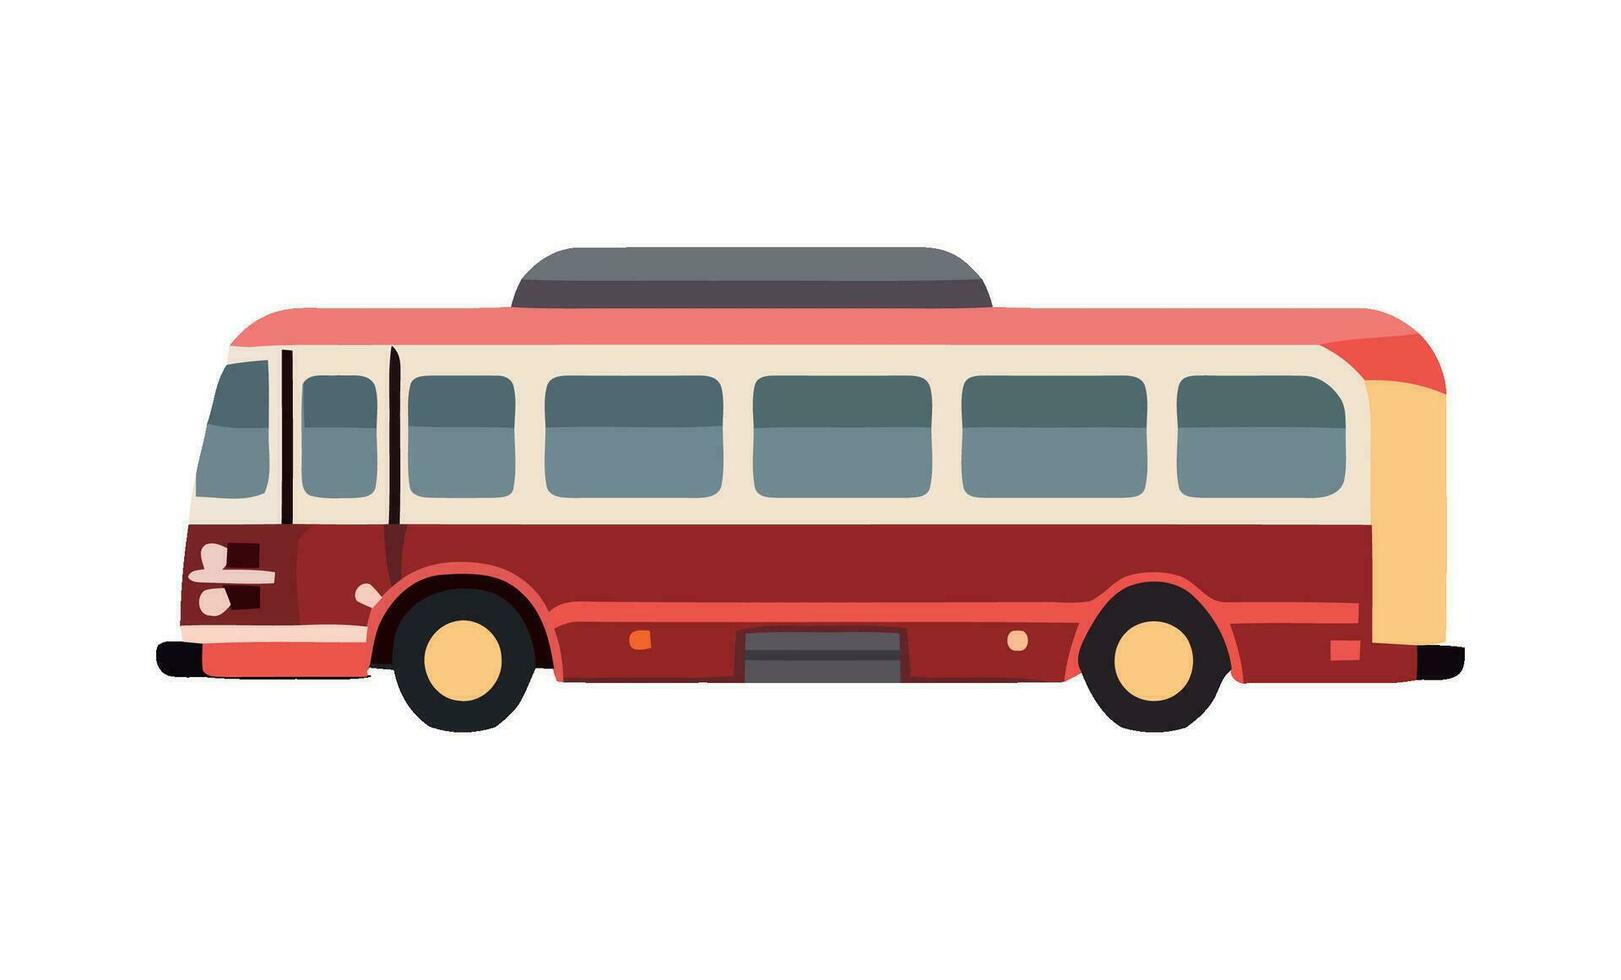 Tour bus transportation vehicle icon isolated vector